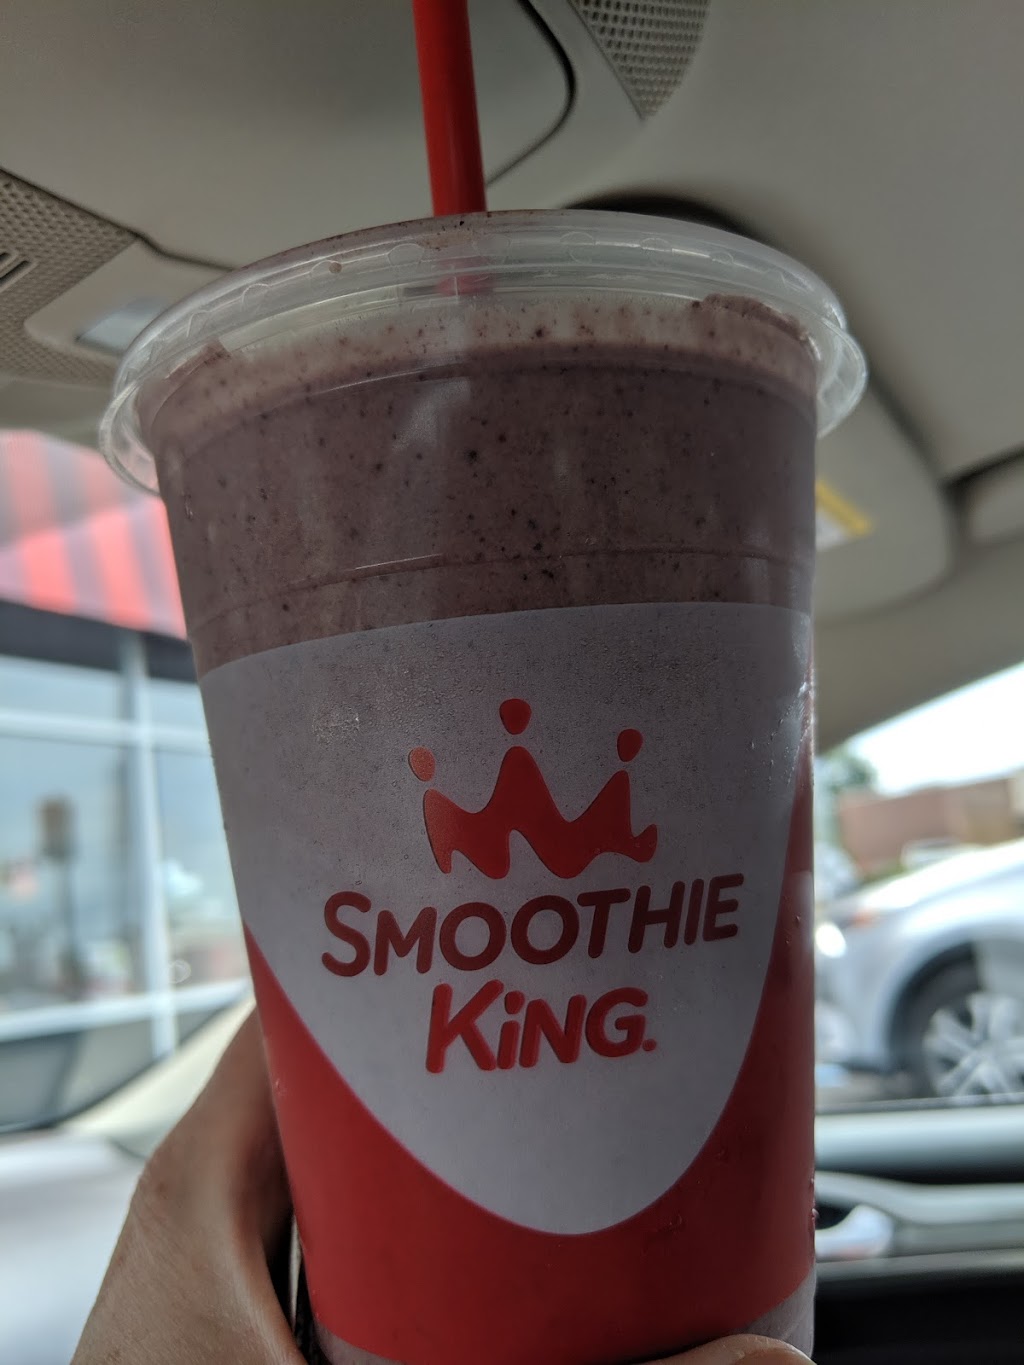 Smoothie King | 9777 E US Hwy 36 Suite 103, Avon, IN 46123 | Phone: (317) 426-2690